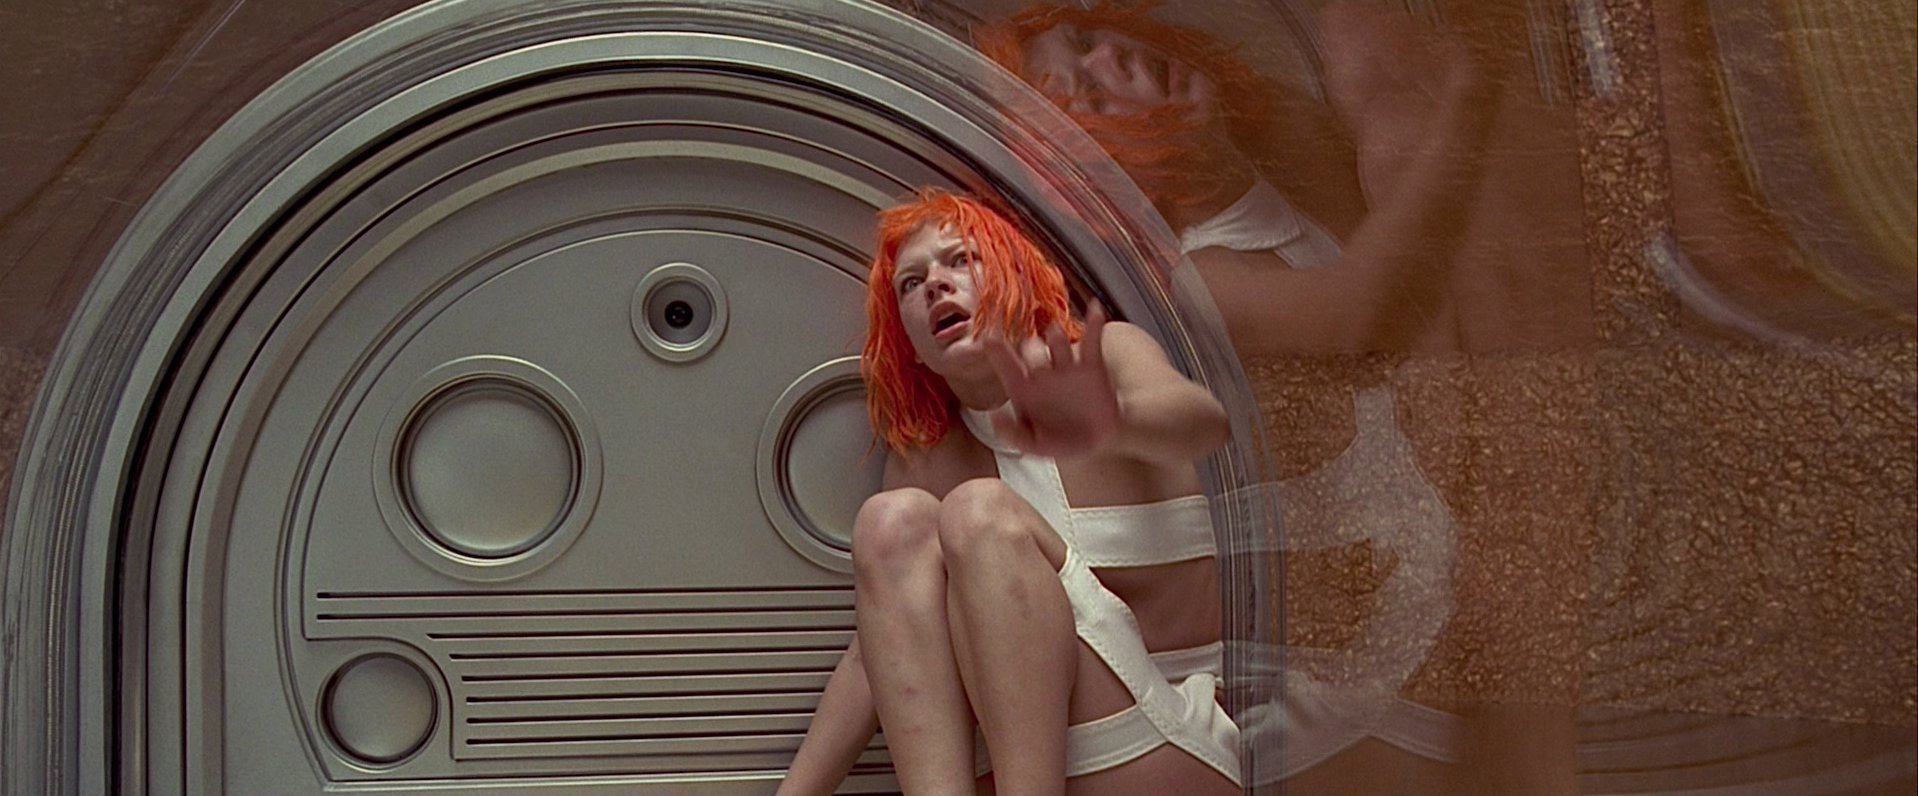 The Fifth Element Image: The Fifth Element.